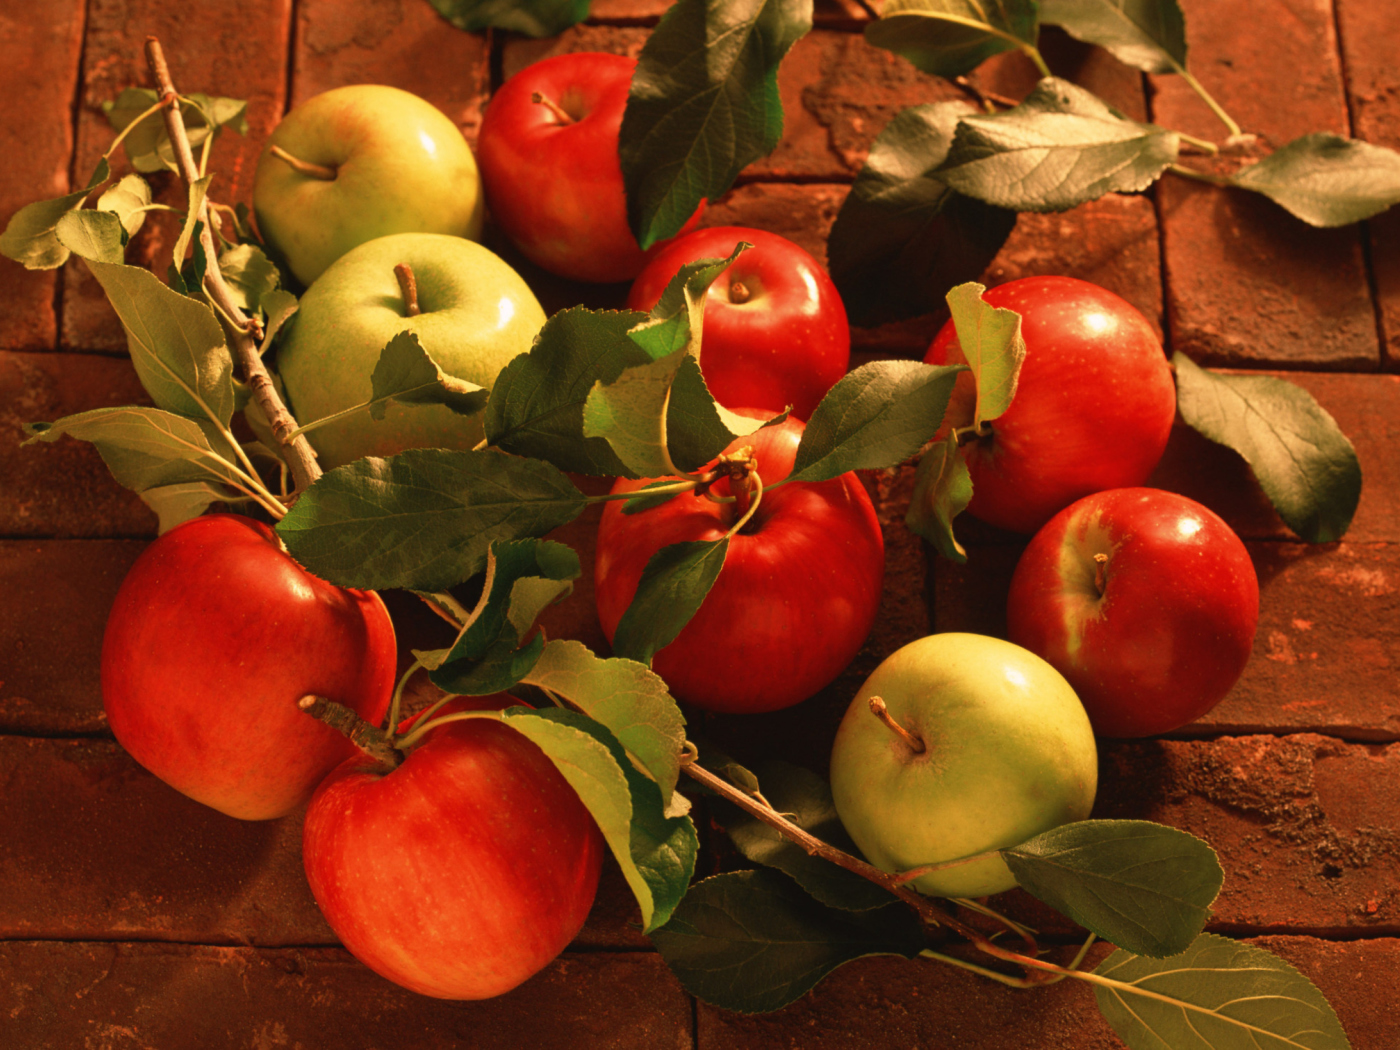 Apples And Juicy Leaves wallpaper 1400x1050